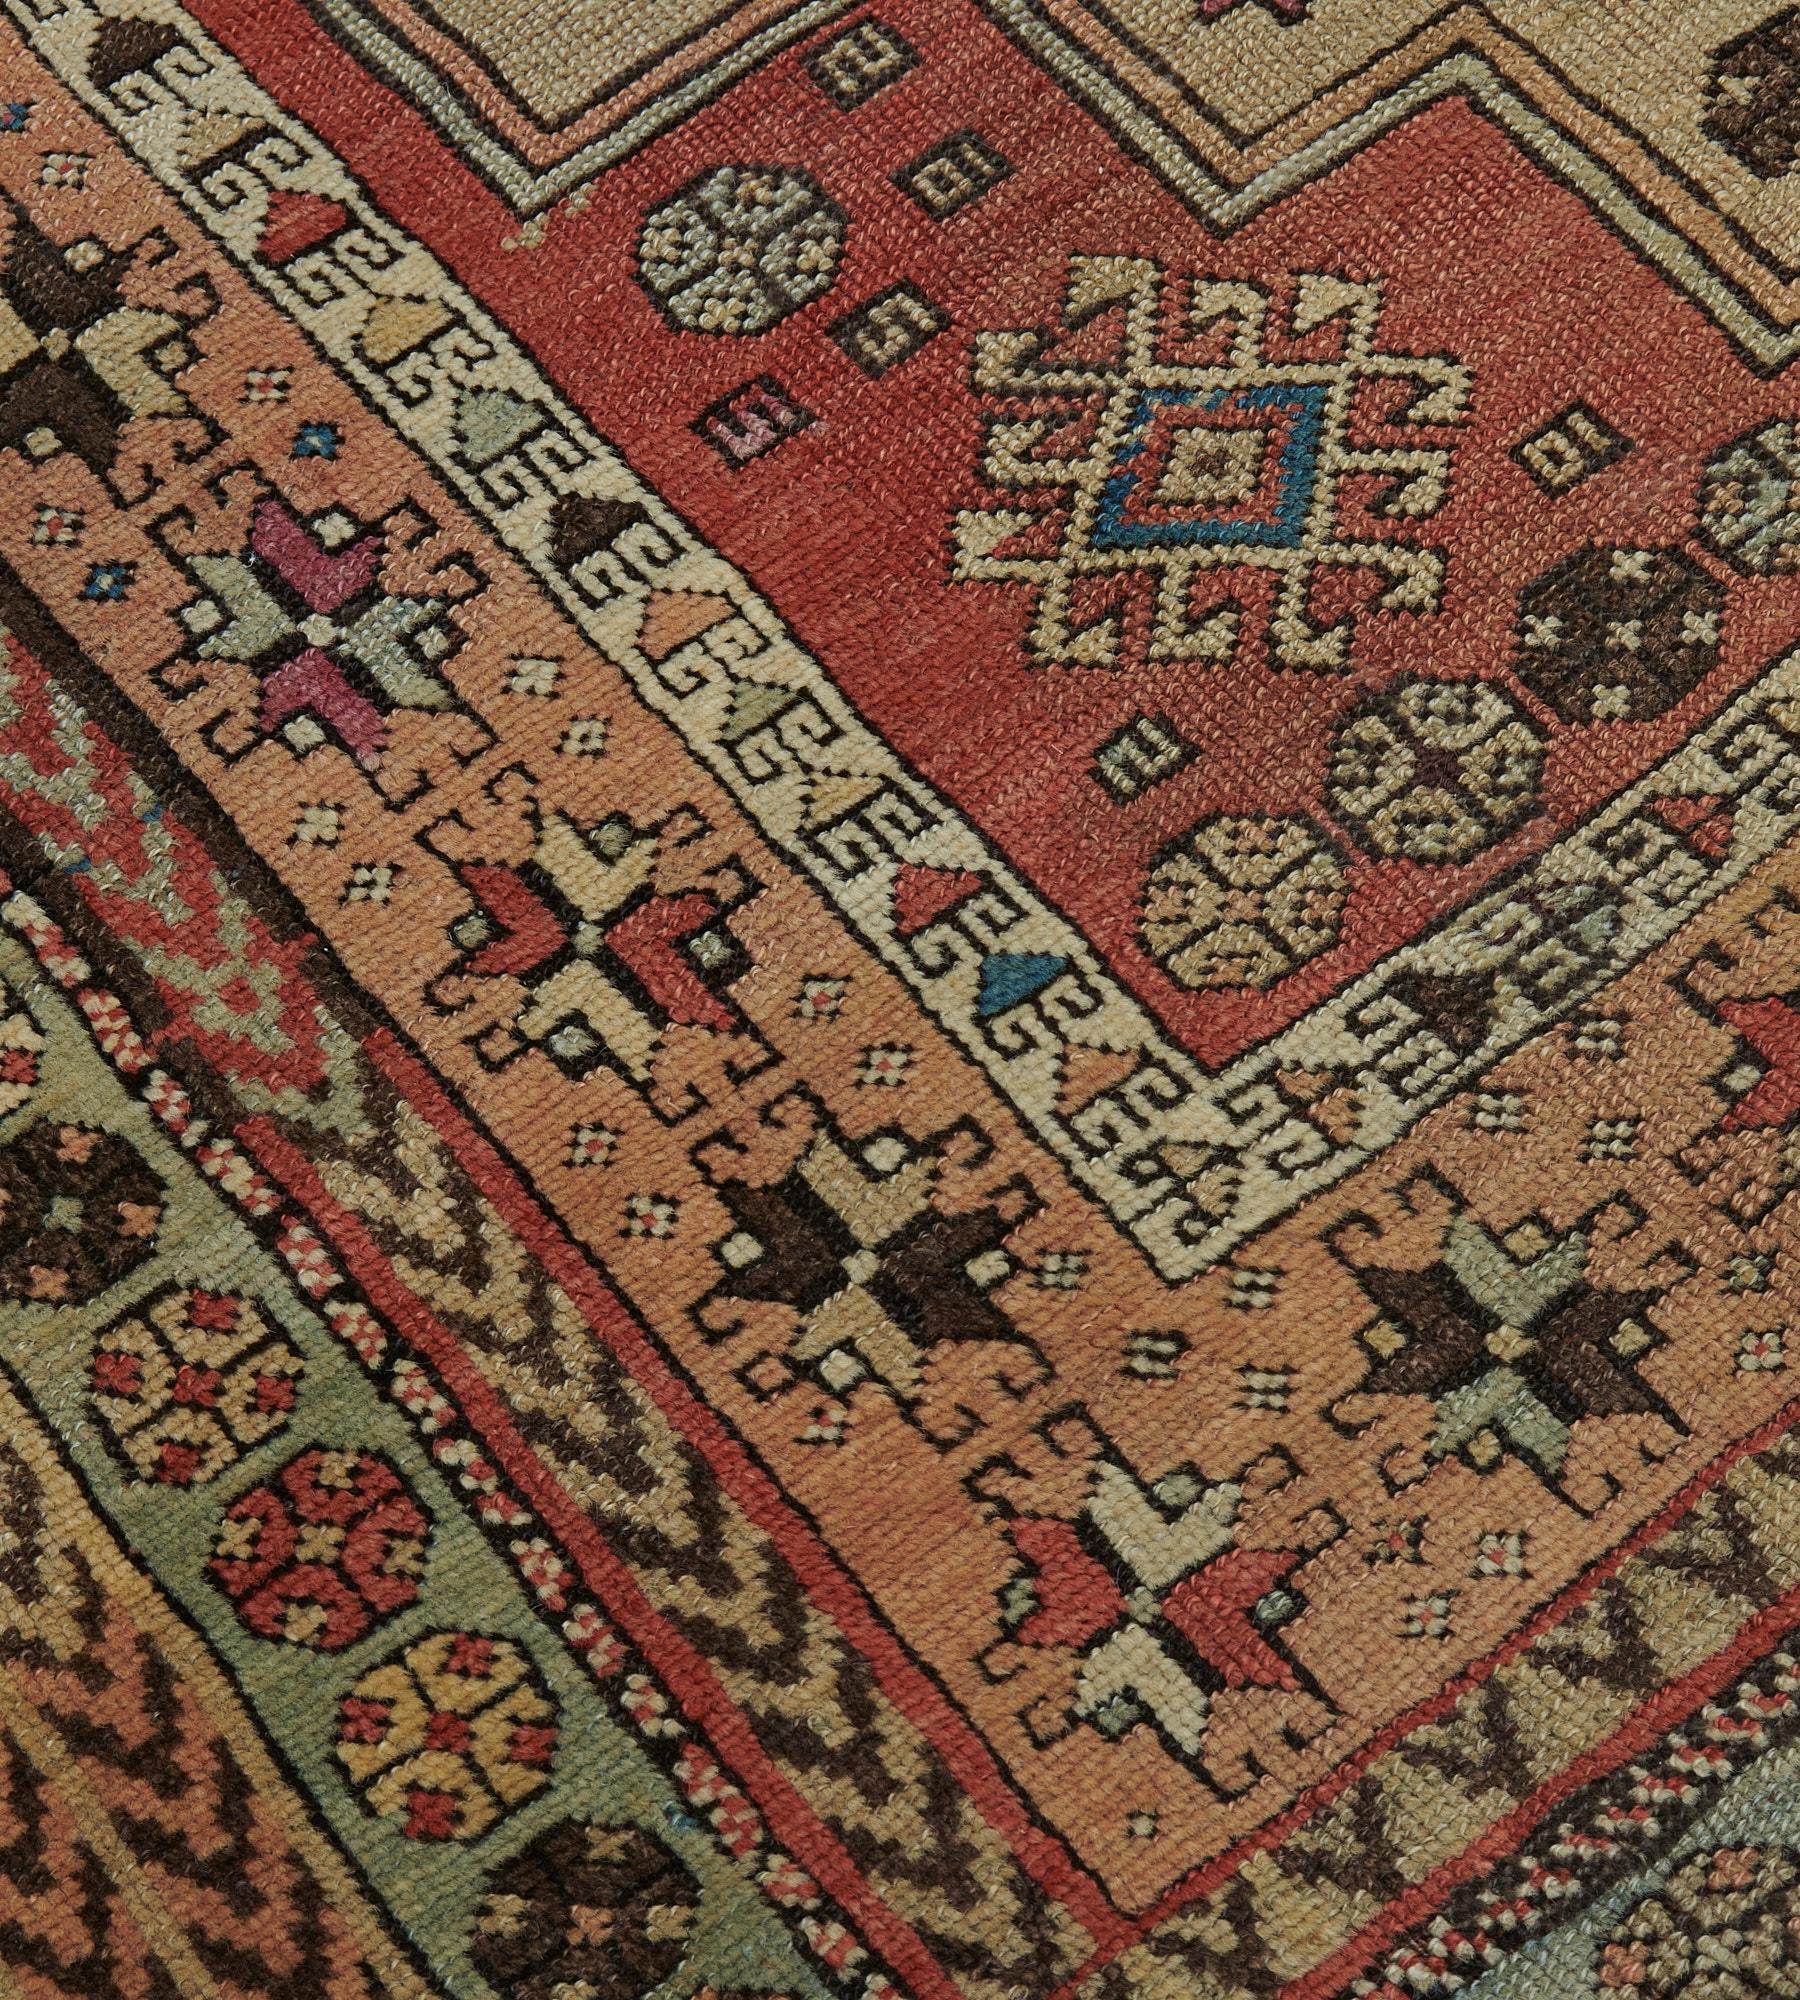 Antique Hand-Knotted Wool Traditional Karabagh Runner, c. 1880 For Sale 4